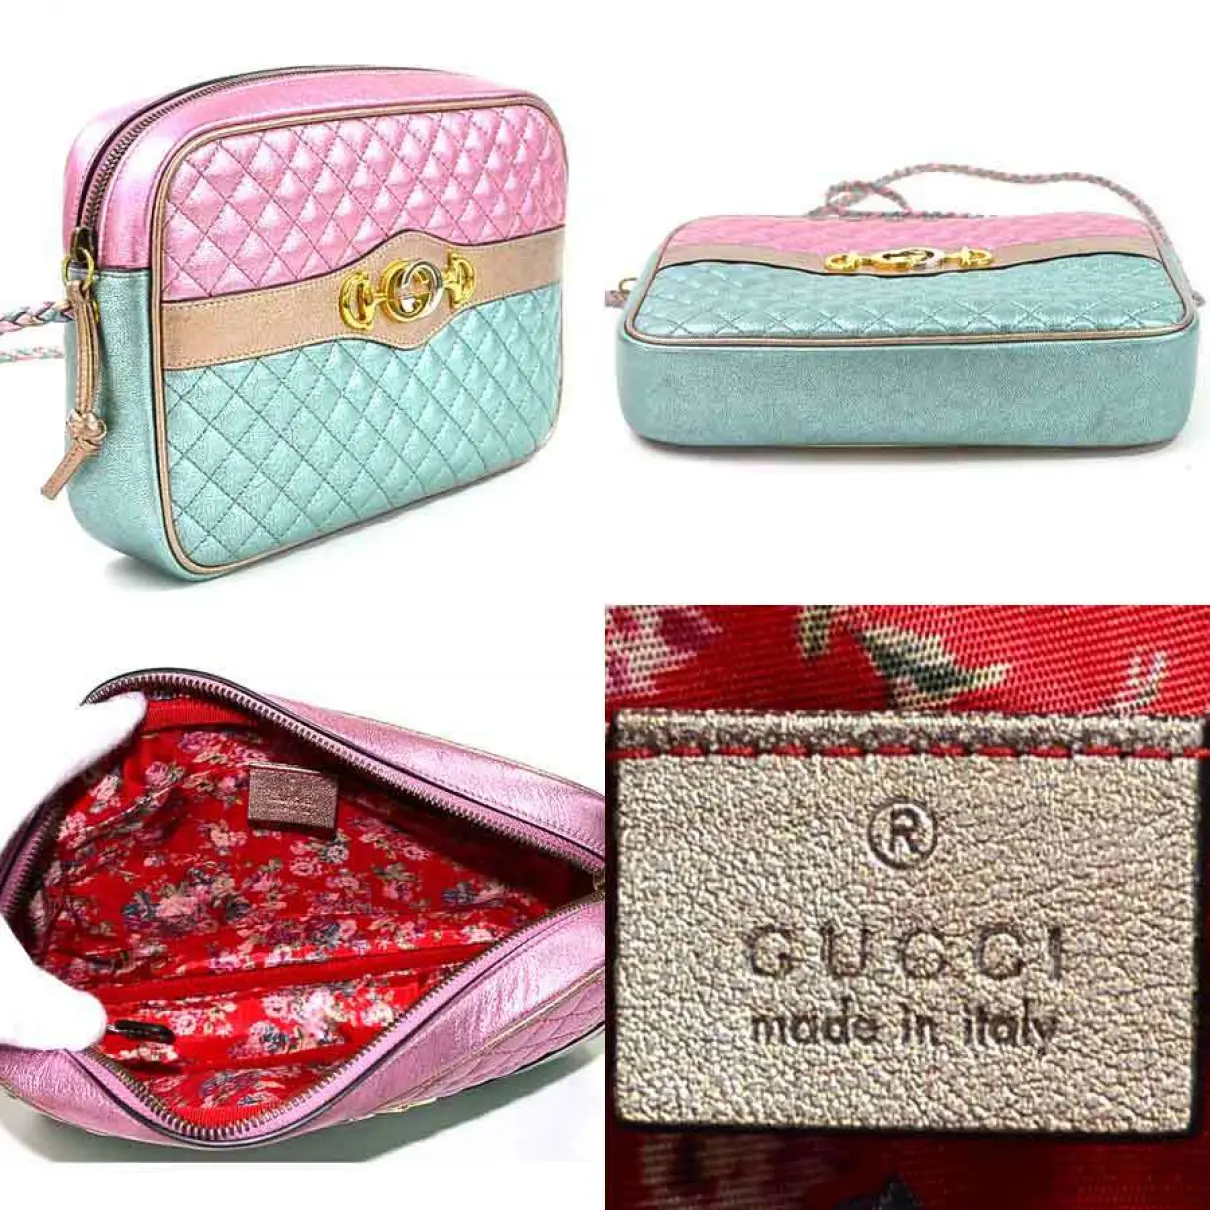 Buy Gucci Laminated leather crossbody bag online